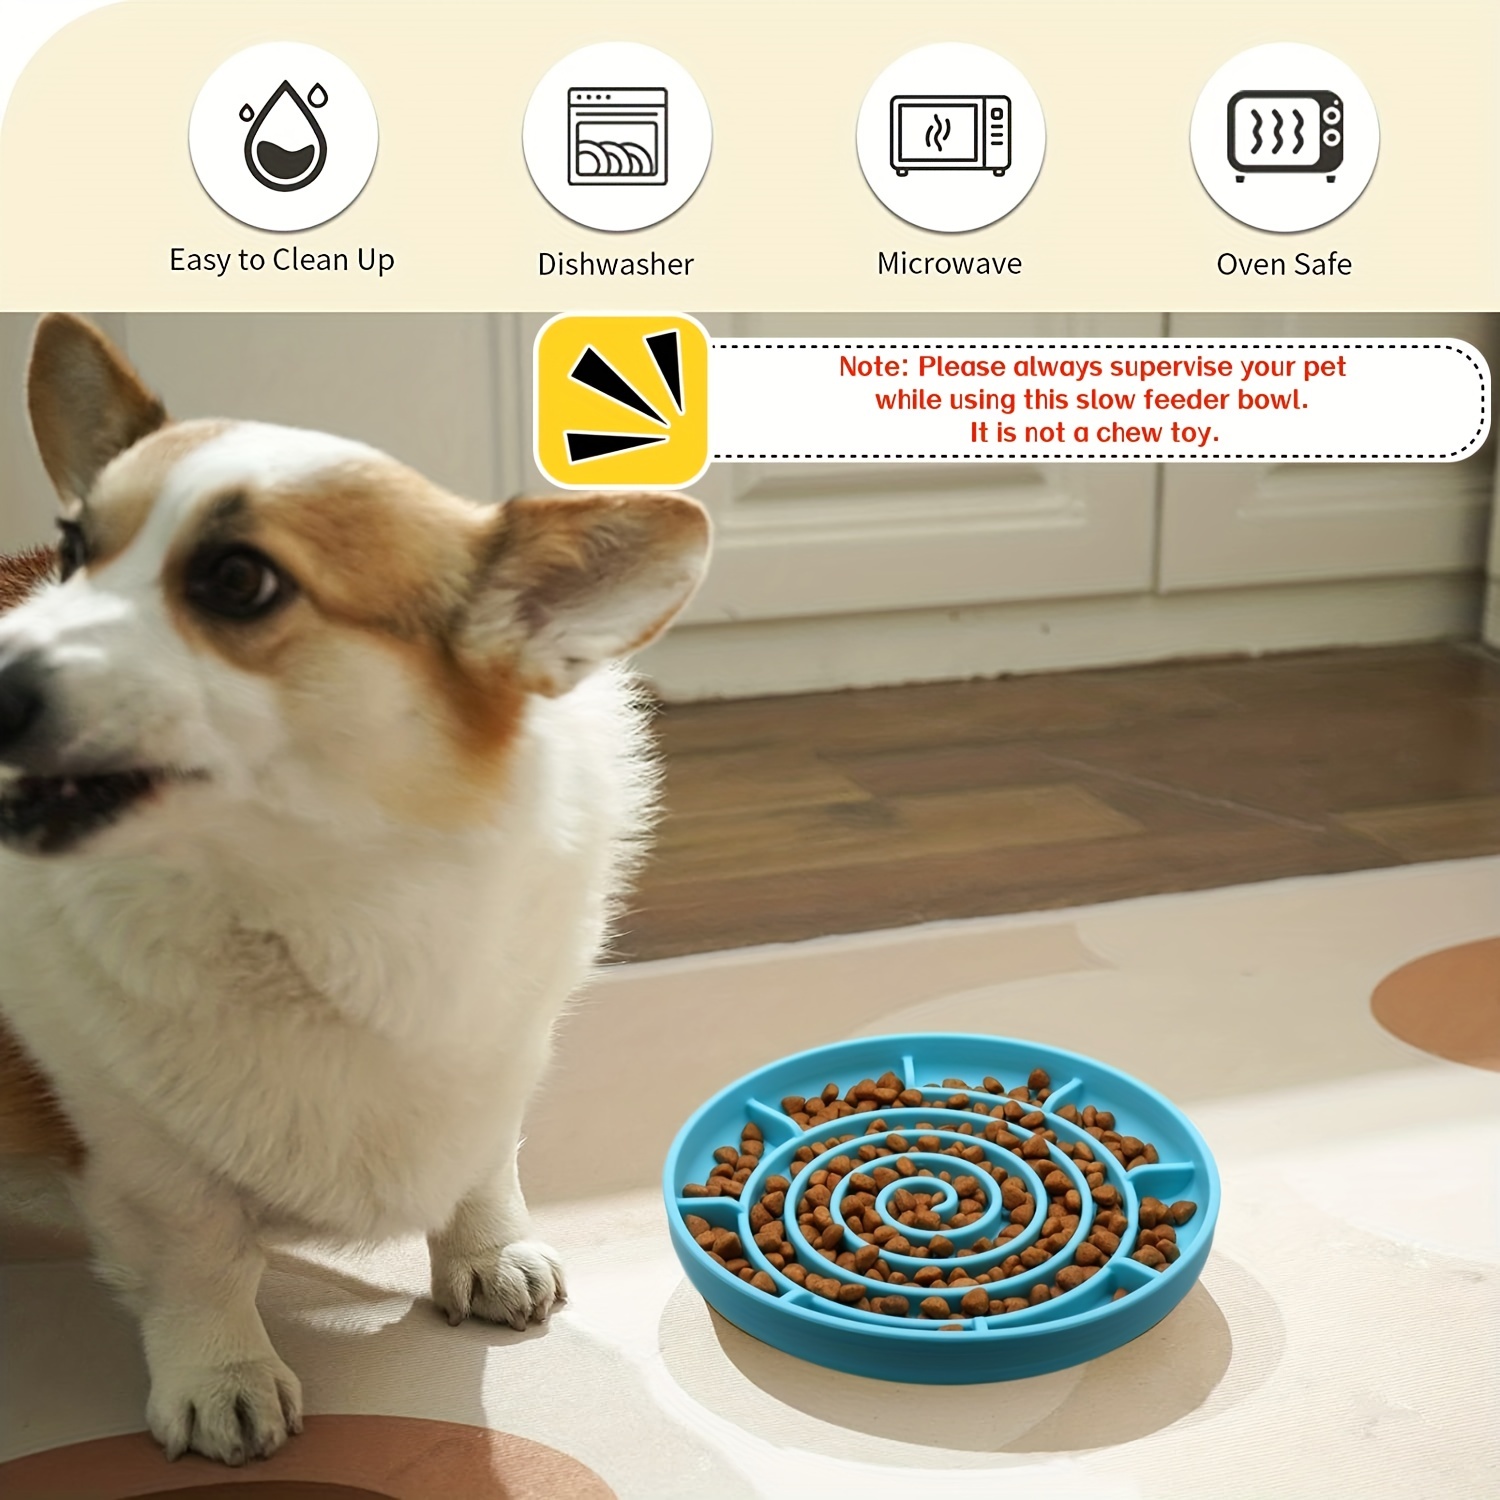 Non-slip Silicone Slow Feeder Puzzle Bowl: Reduce Your Pet's